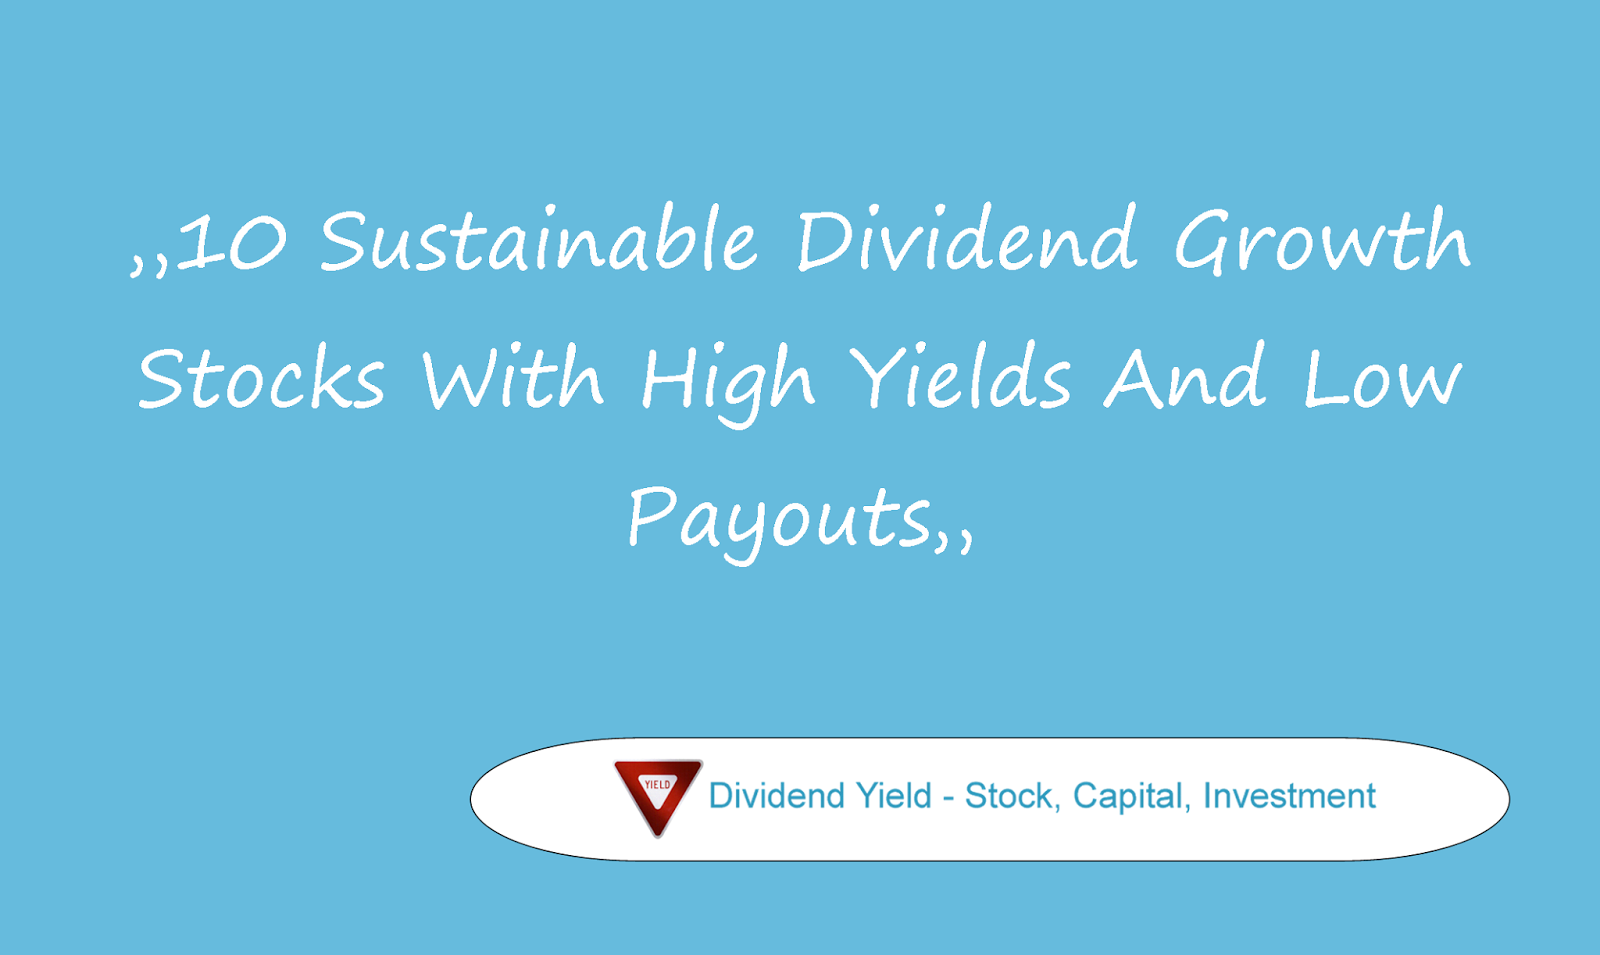 10 Sustainable Dividend Growth Stocks With High Yields And Low Payouts